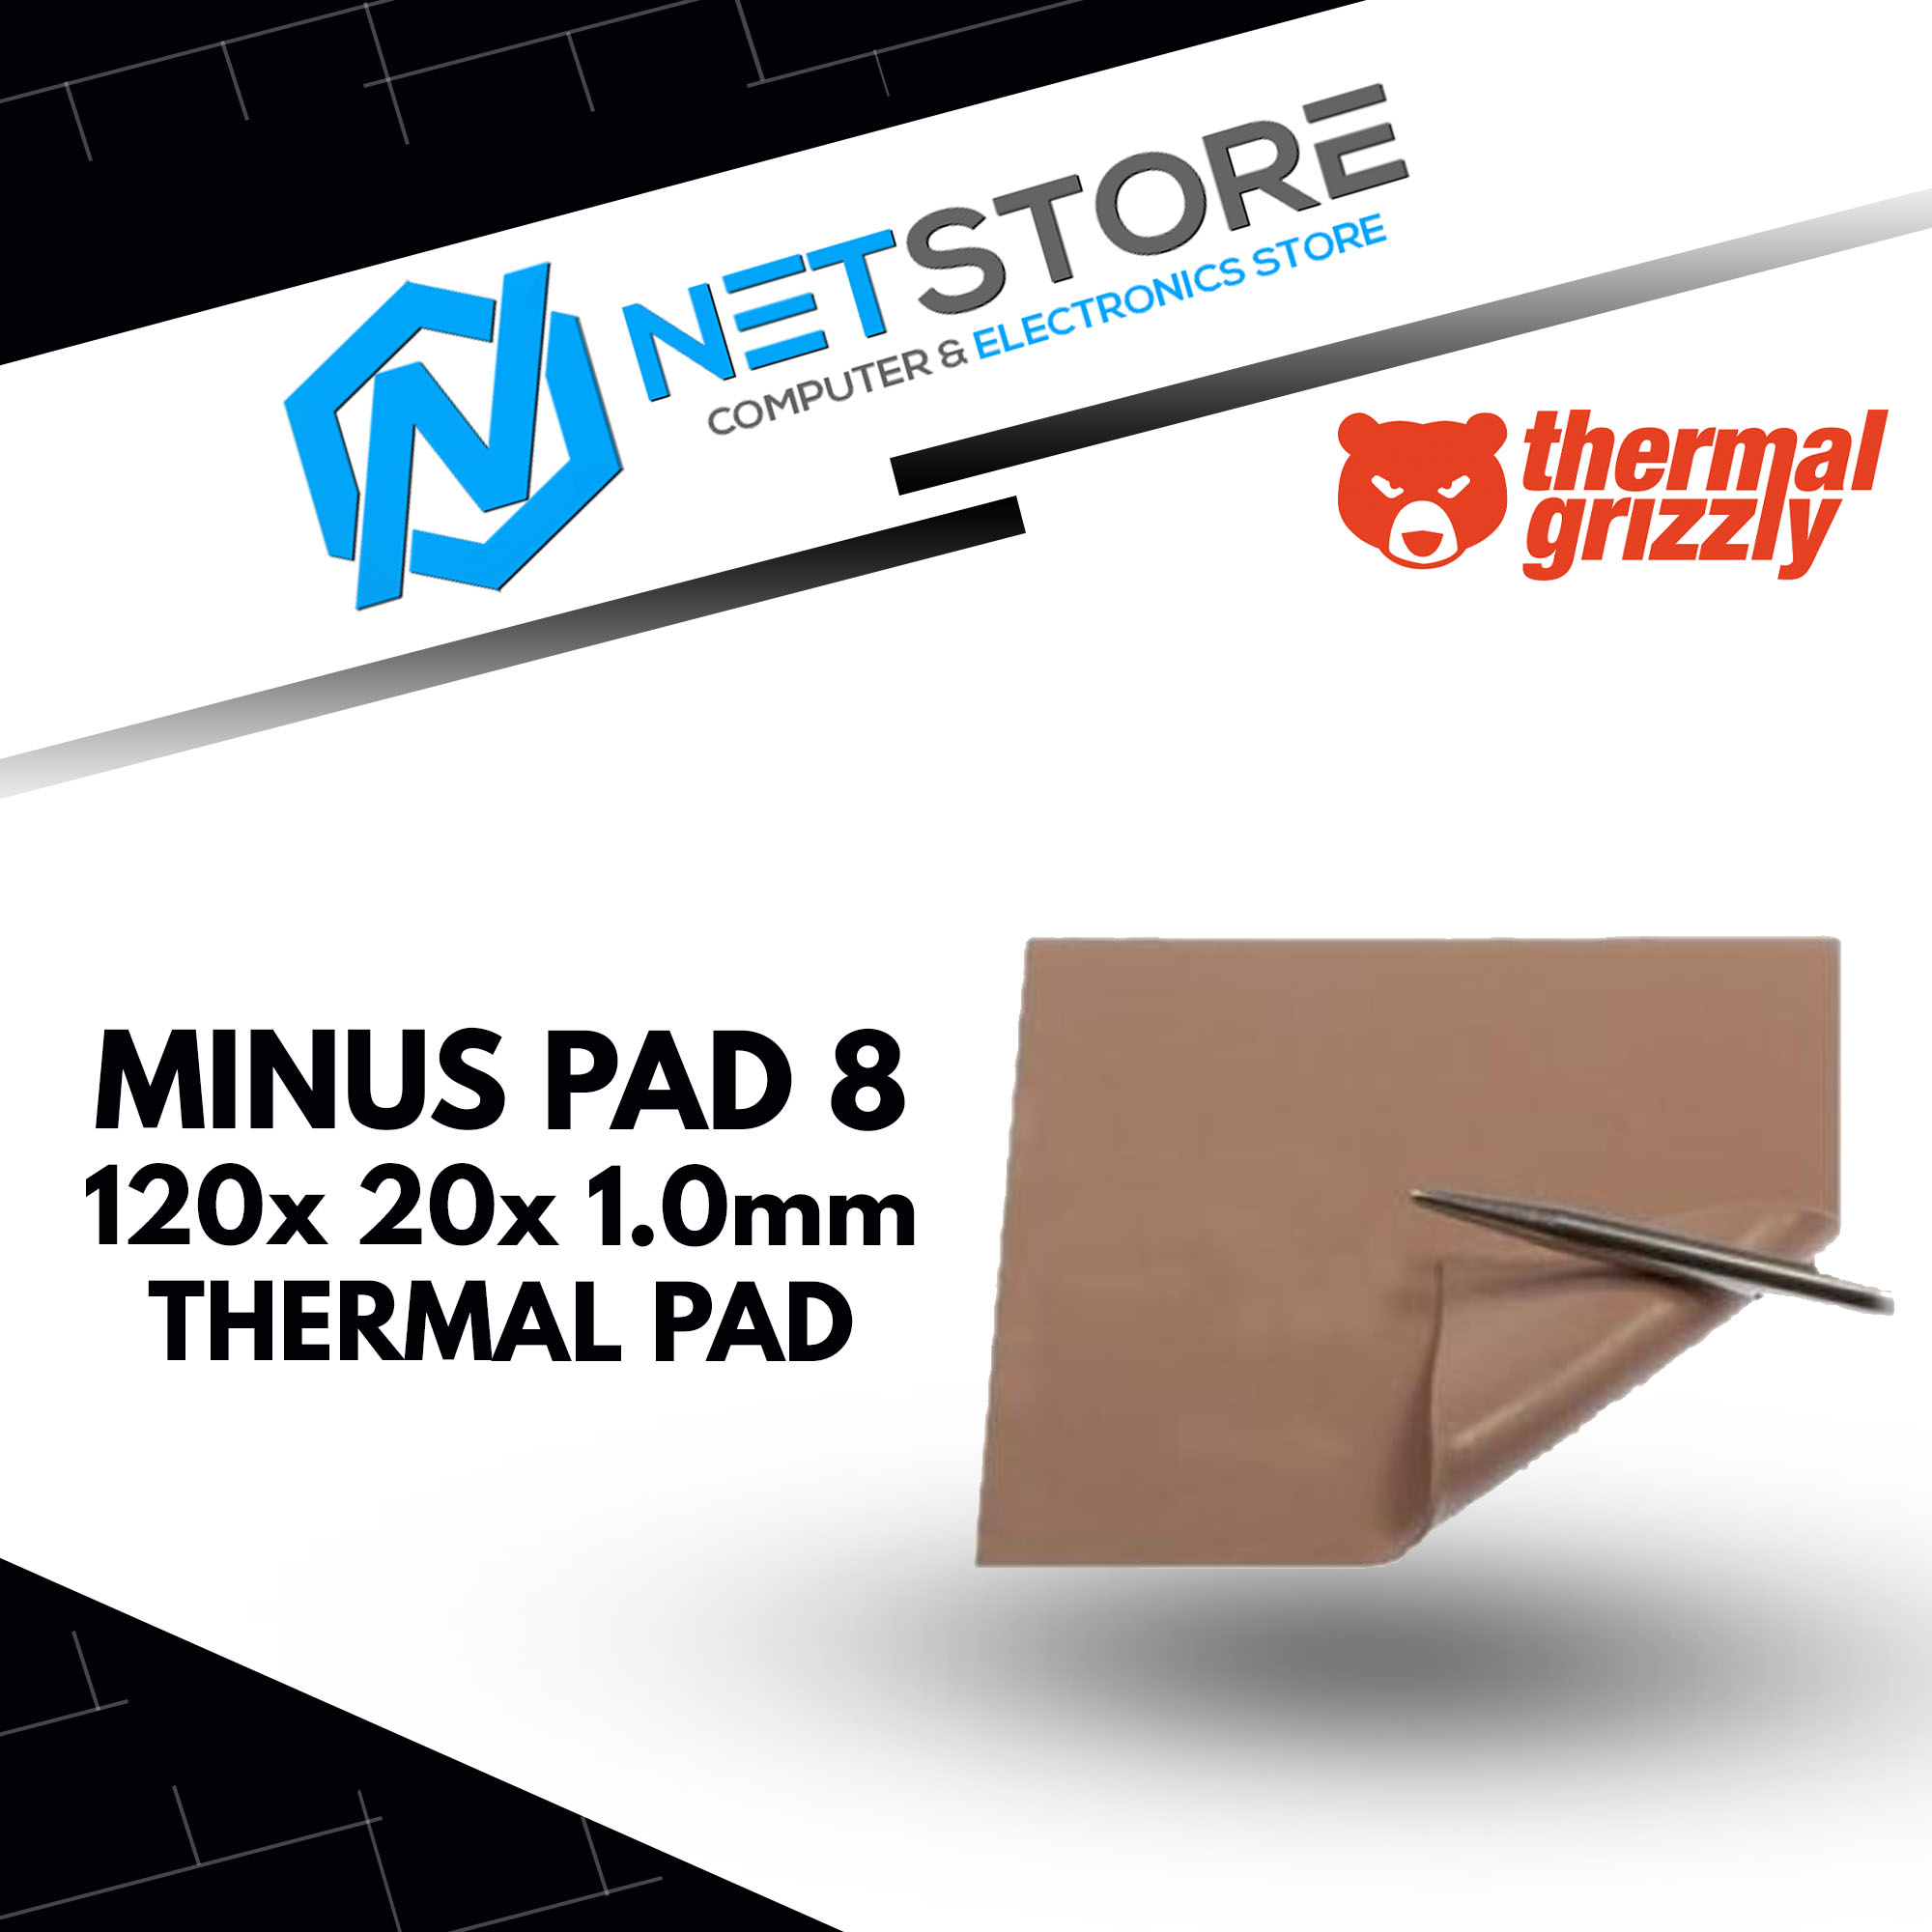 THERMAL GRIZZLY MINUS PAD 8 120x 20x 1.0mm THERMAL PAD